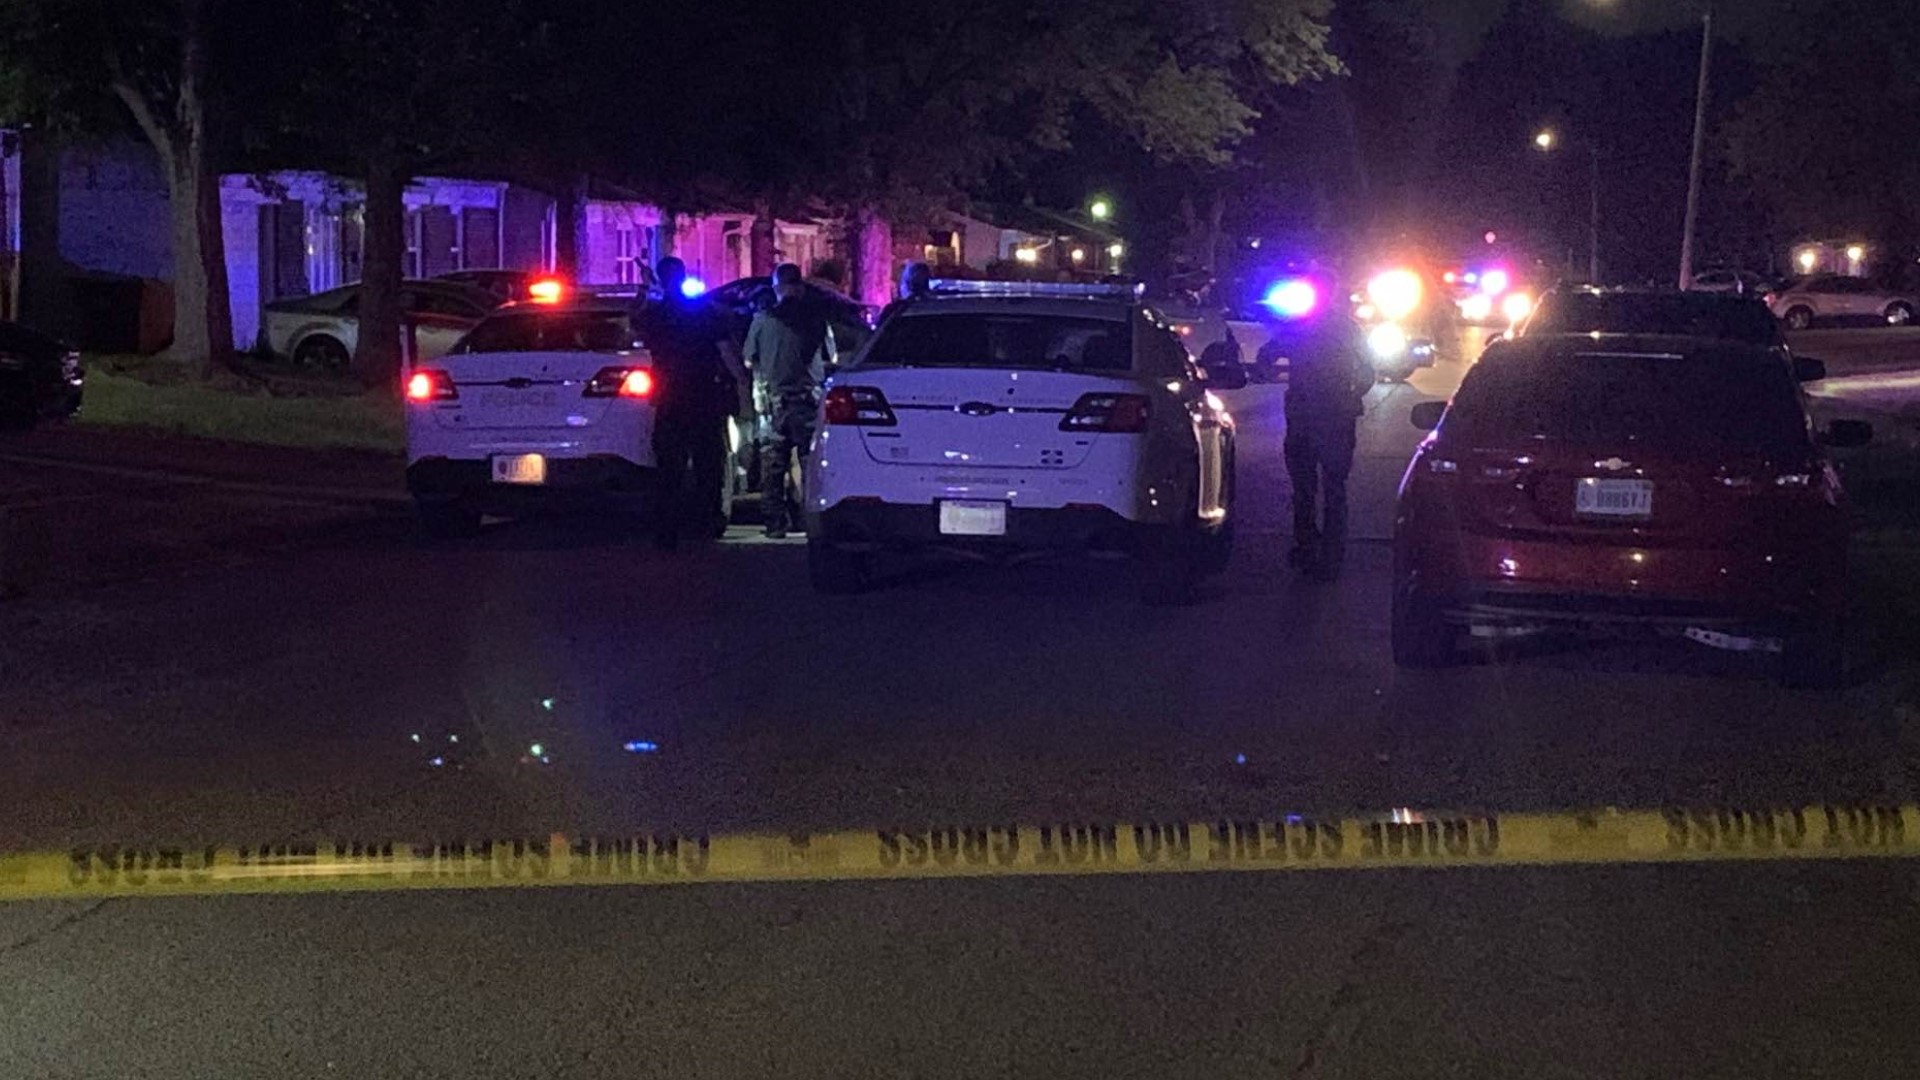 The shooting was reported around 1:30 a.m. in the 6500 block of Meadowlark Drive, near 42nd Street and Arlington Avenue.